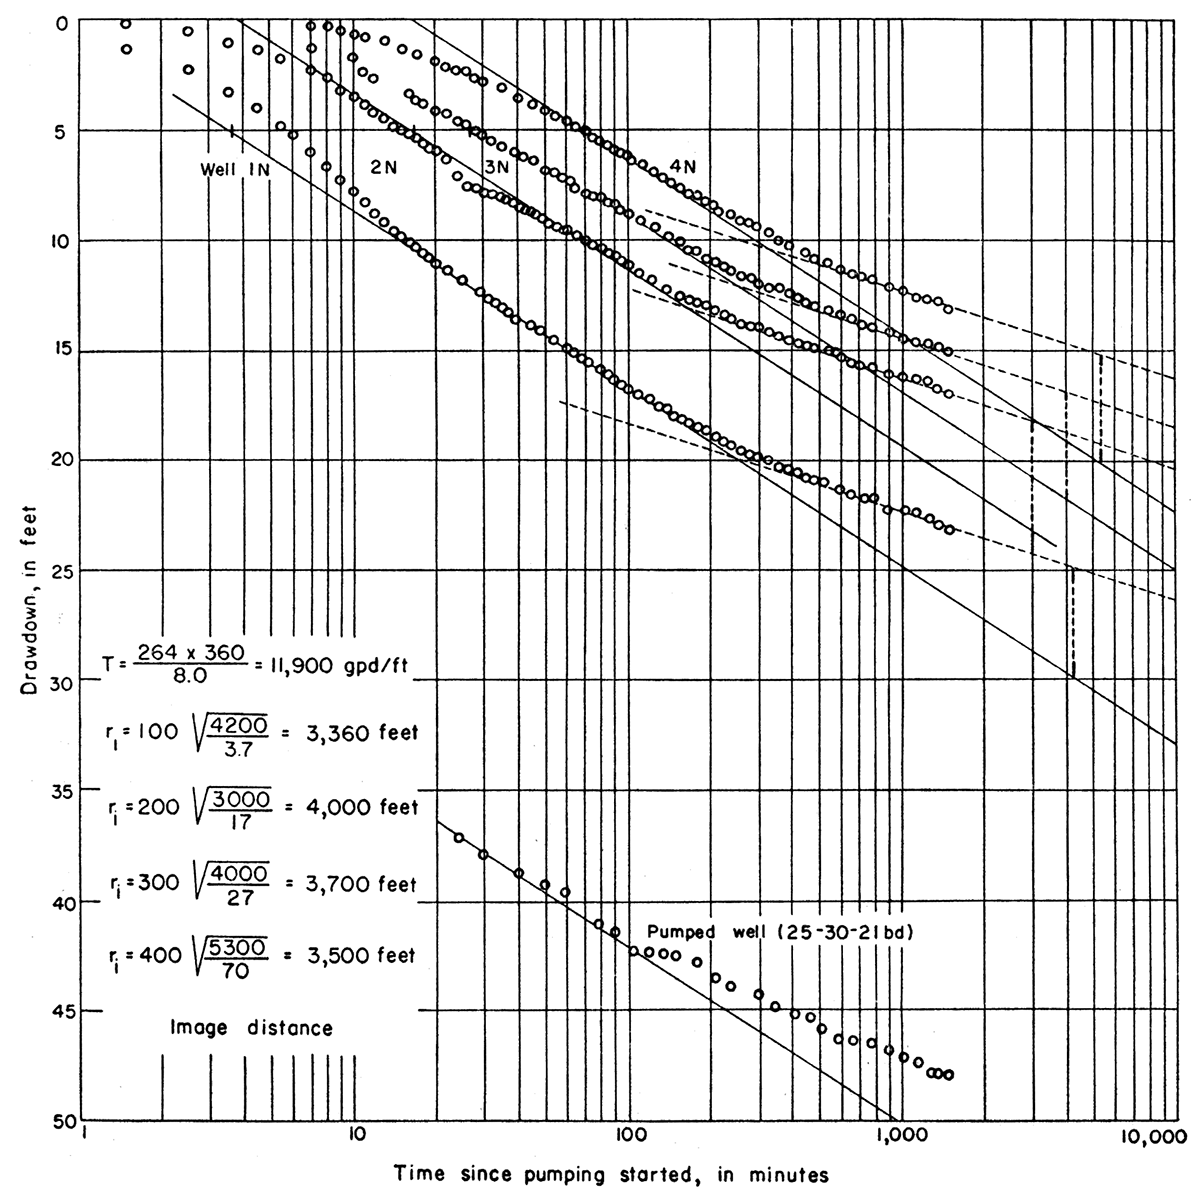 Drawdown of water levels in pumped well (25-30-21bd) and observation wells during McGehee aquifer test.